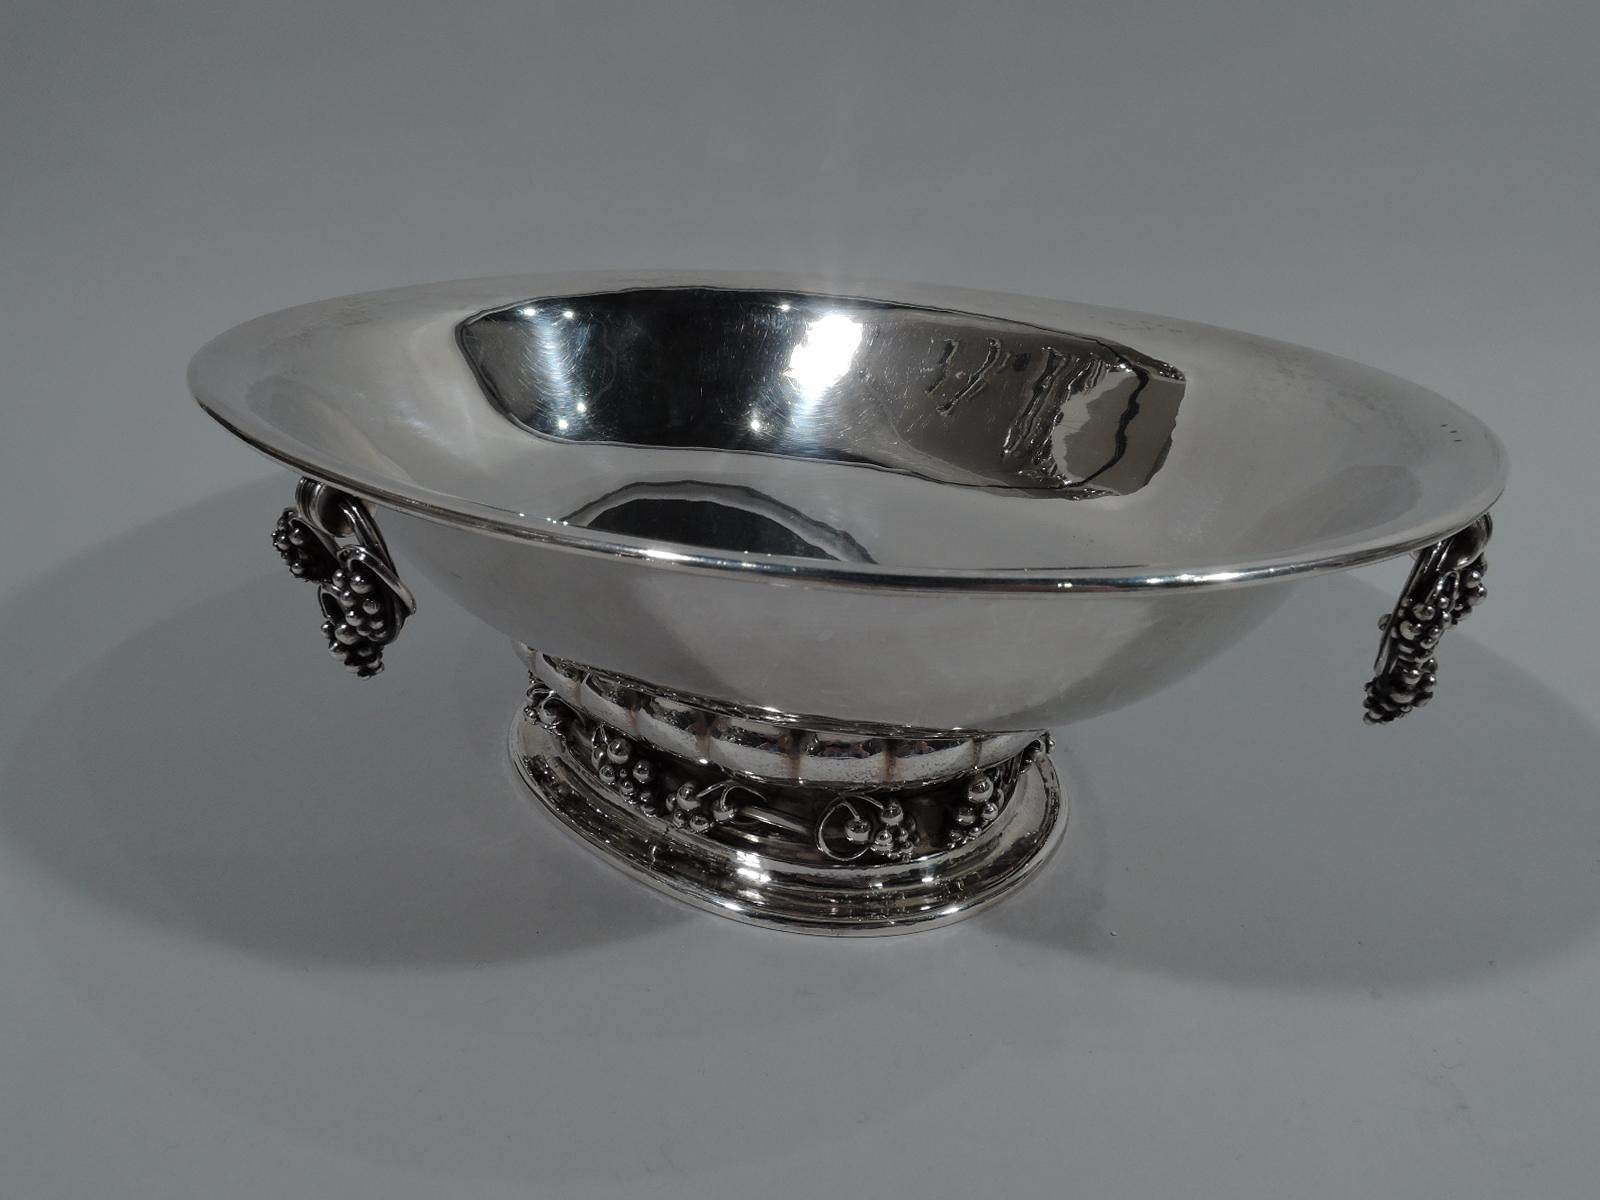 Modern sterling silver centerpiece bowl with classic grape motif. Made by Georg Jensen in Copenhagen. Oval bowl on lobed support with applied fruiting grapevine on flat oval foot. Rings entwined with bunches loose-mounted to each side. Fine